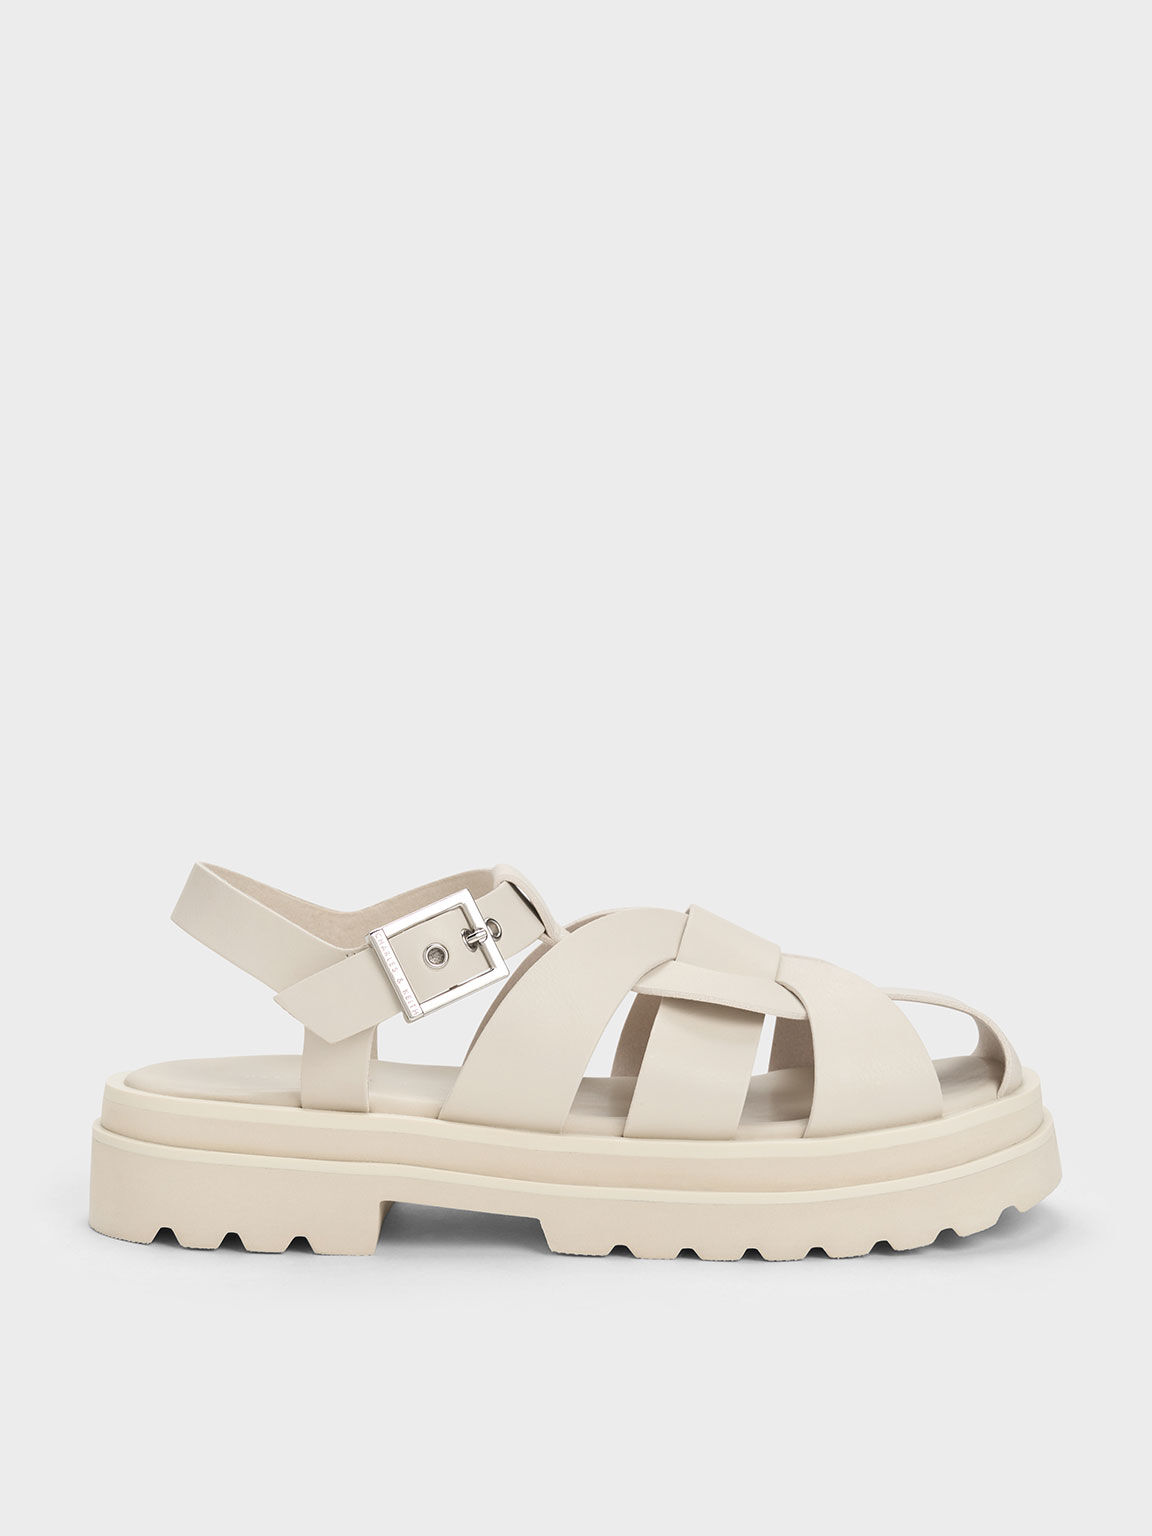 Top more than 218 charles and keith sandals philippines latest